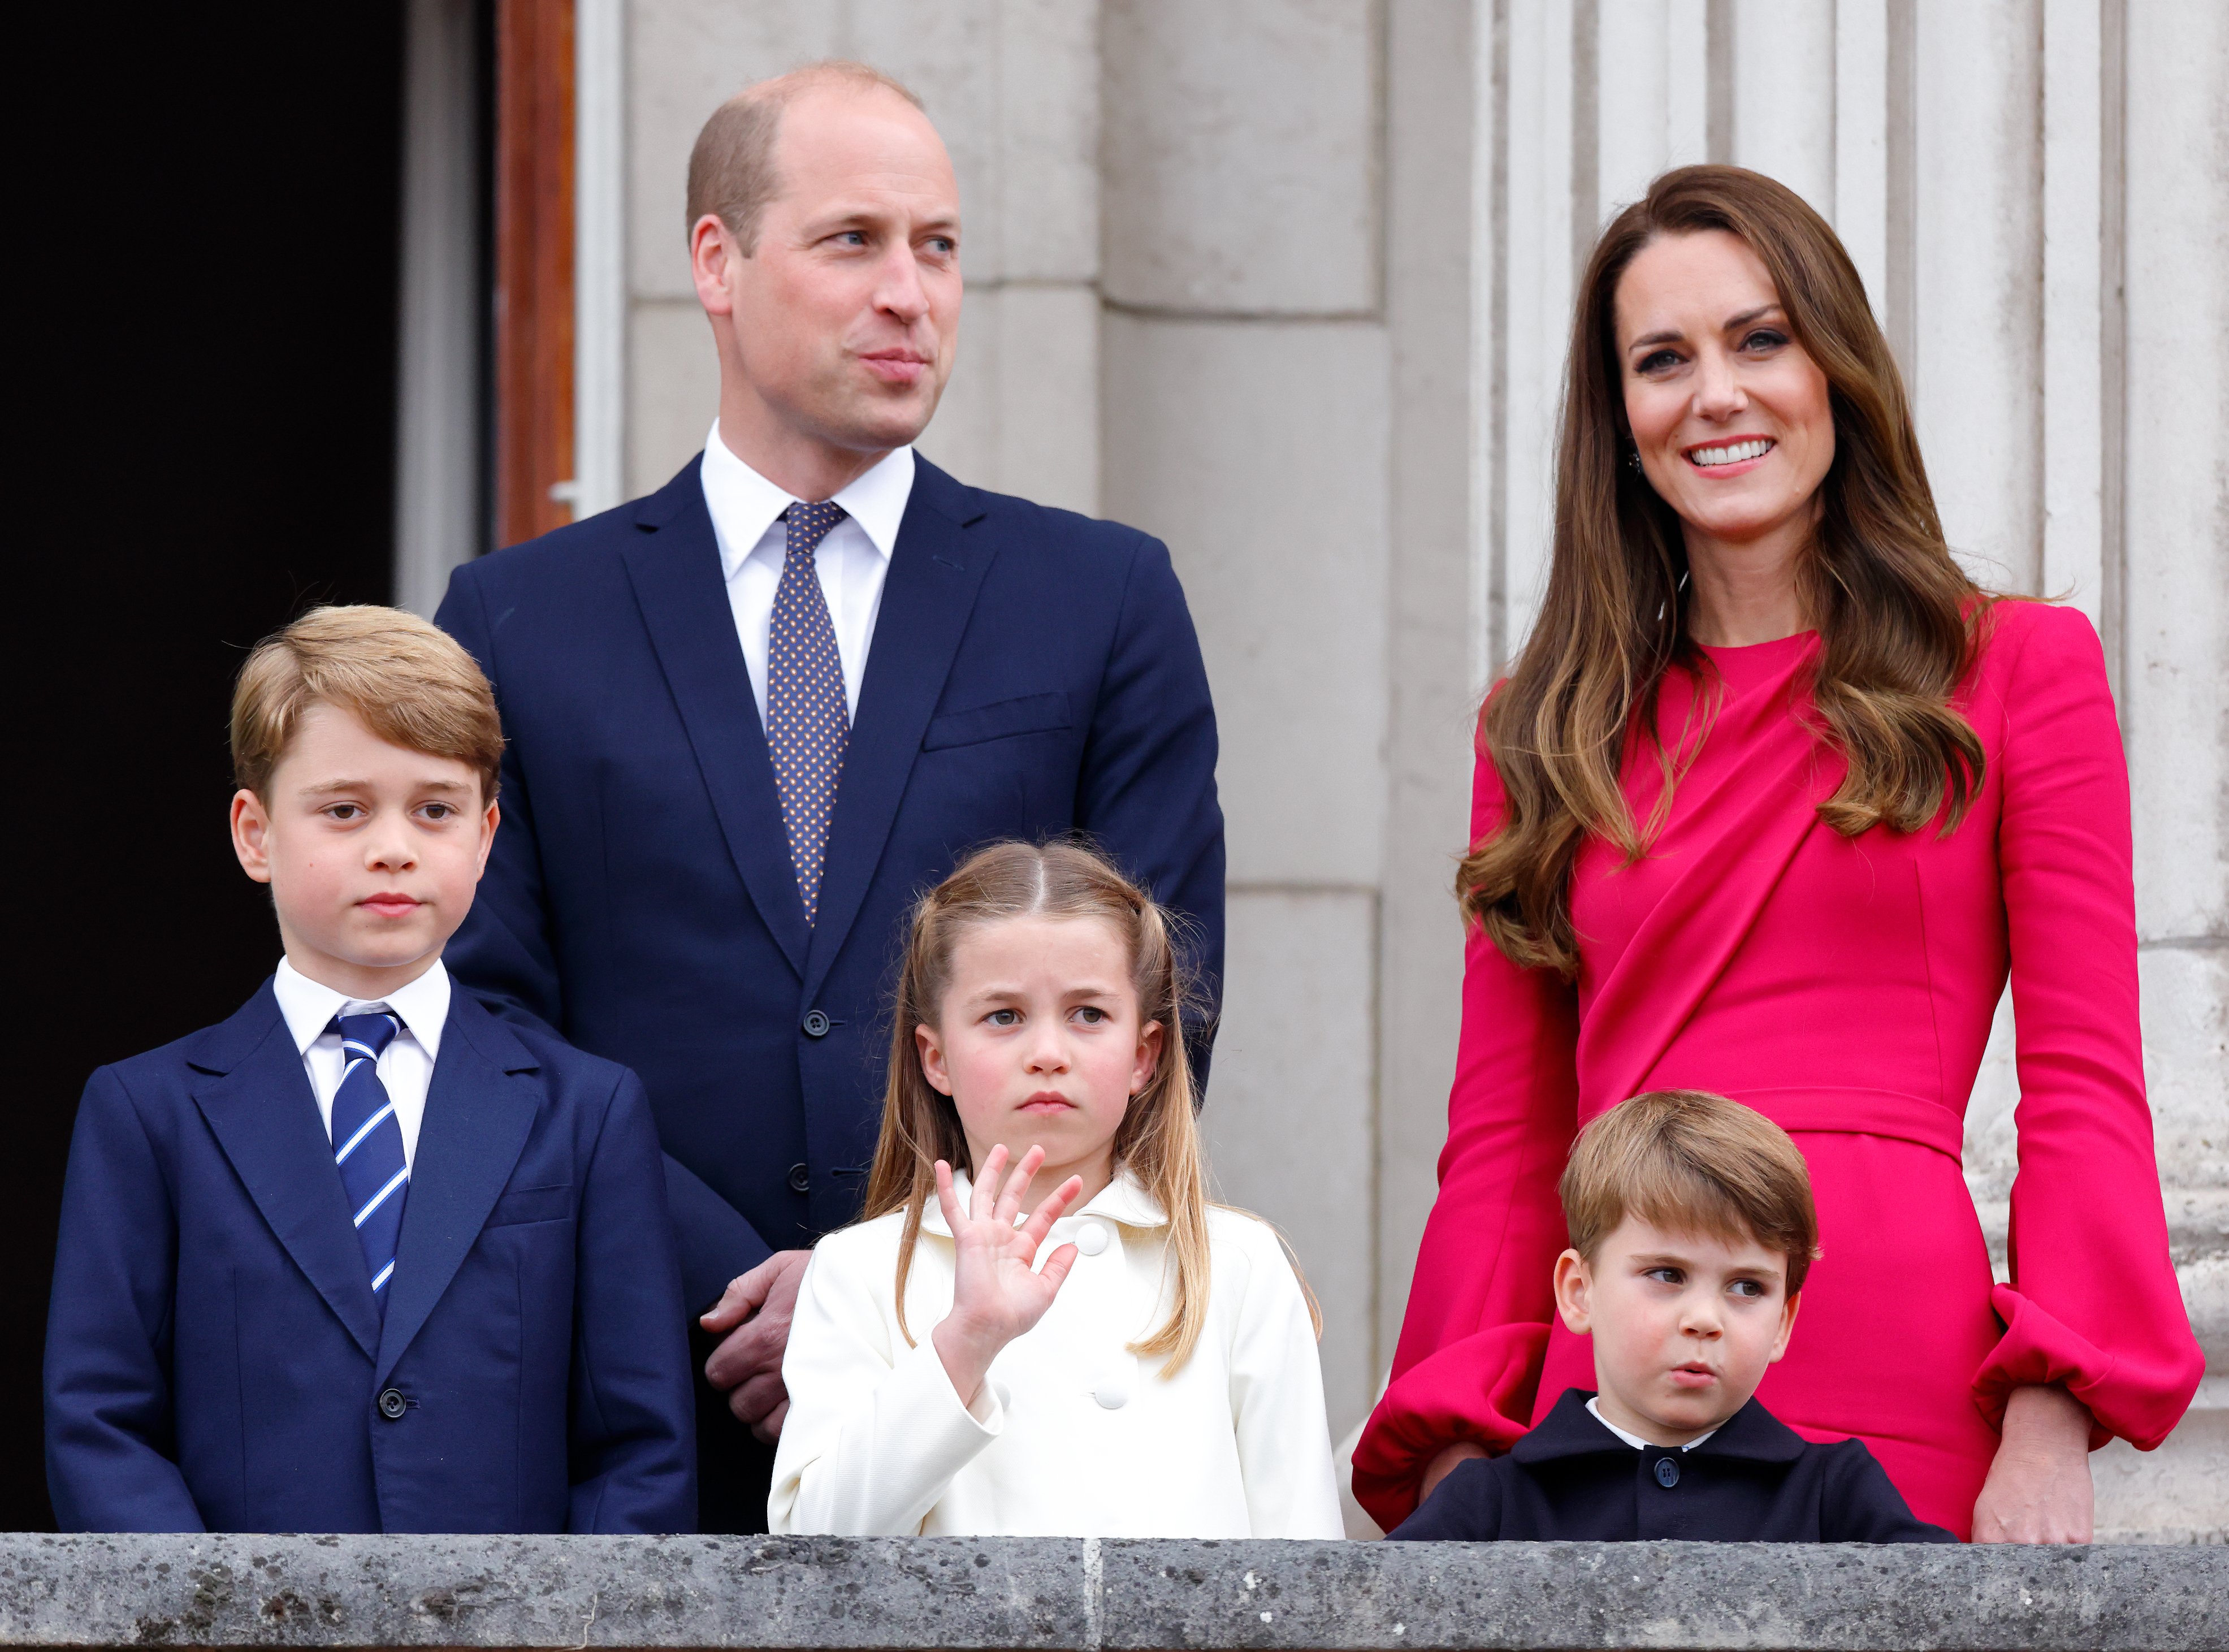 Prince George of Cambridge, Prince William, Duke of Cambridge, Princess Charlotte of Cambridge, Prince Louis of Cambridge and Catherine, Duchess of Cambridge stand on the balcony of Buckingham Palace following the Platinum Pageant on June 5, 2022 in London, England. The Platinum Jubilee of Elizabeth II is being celebrated from June 2 to June 5, 2022, in the UK. | Source: Getty Images